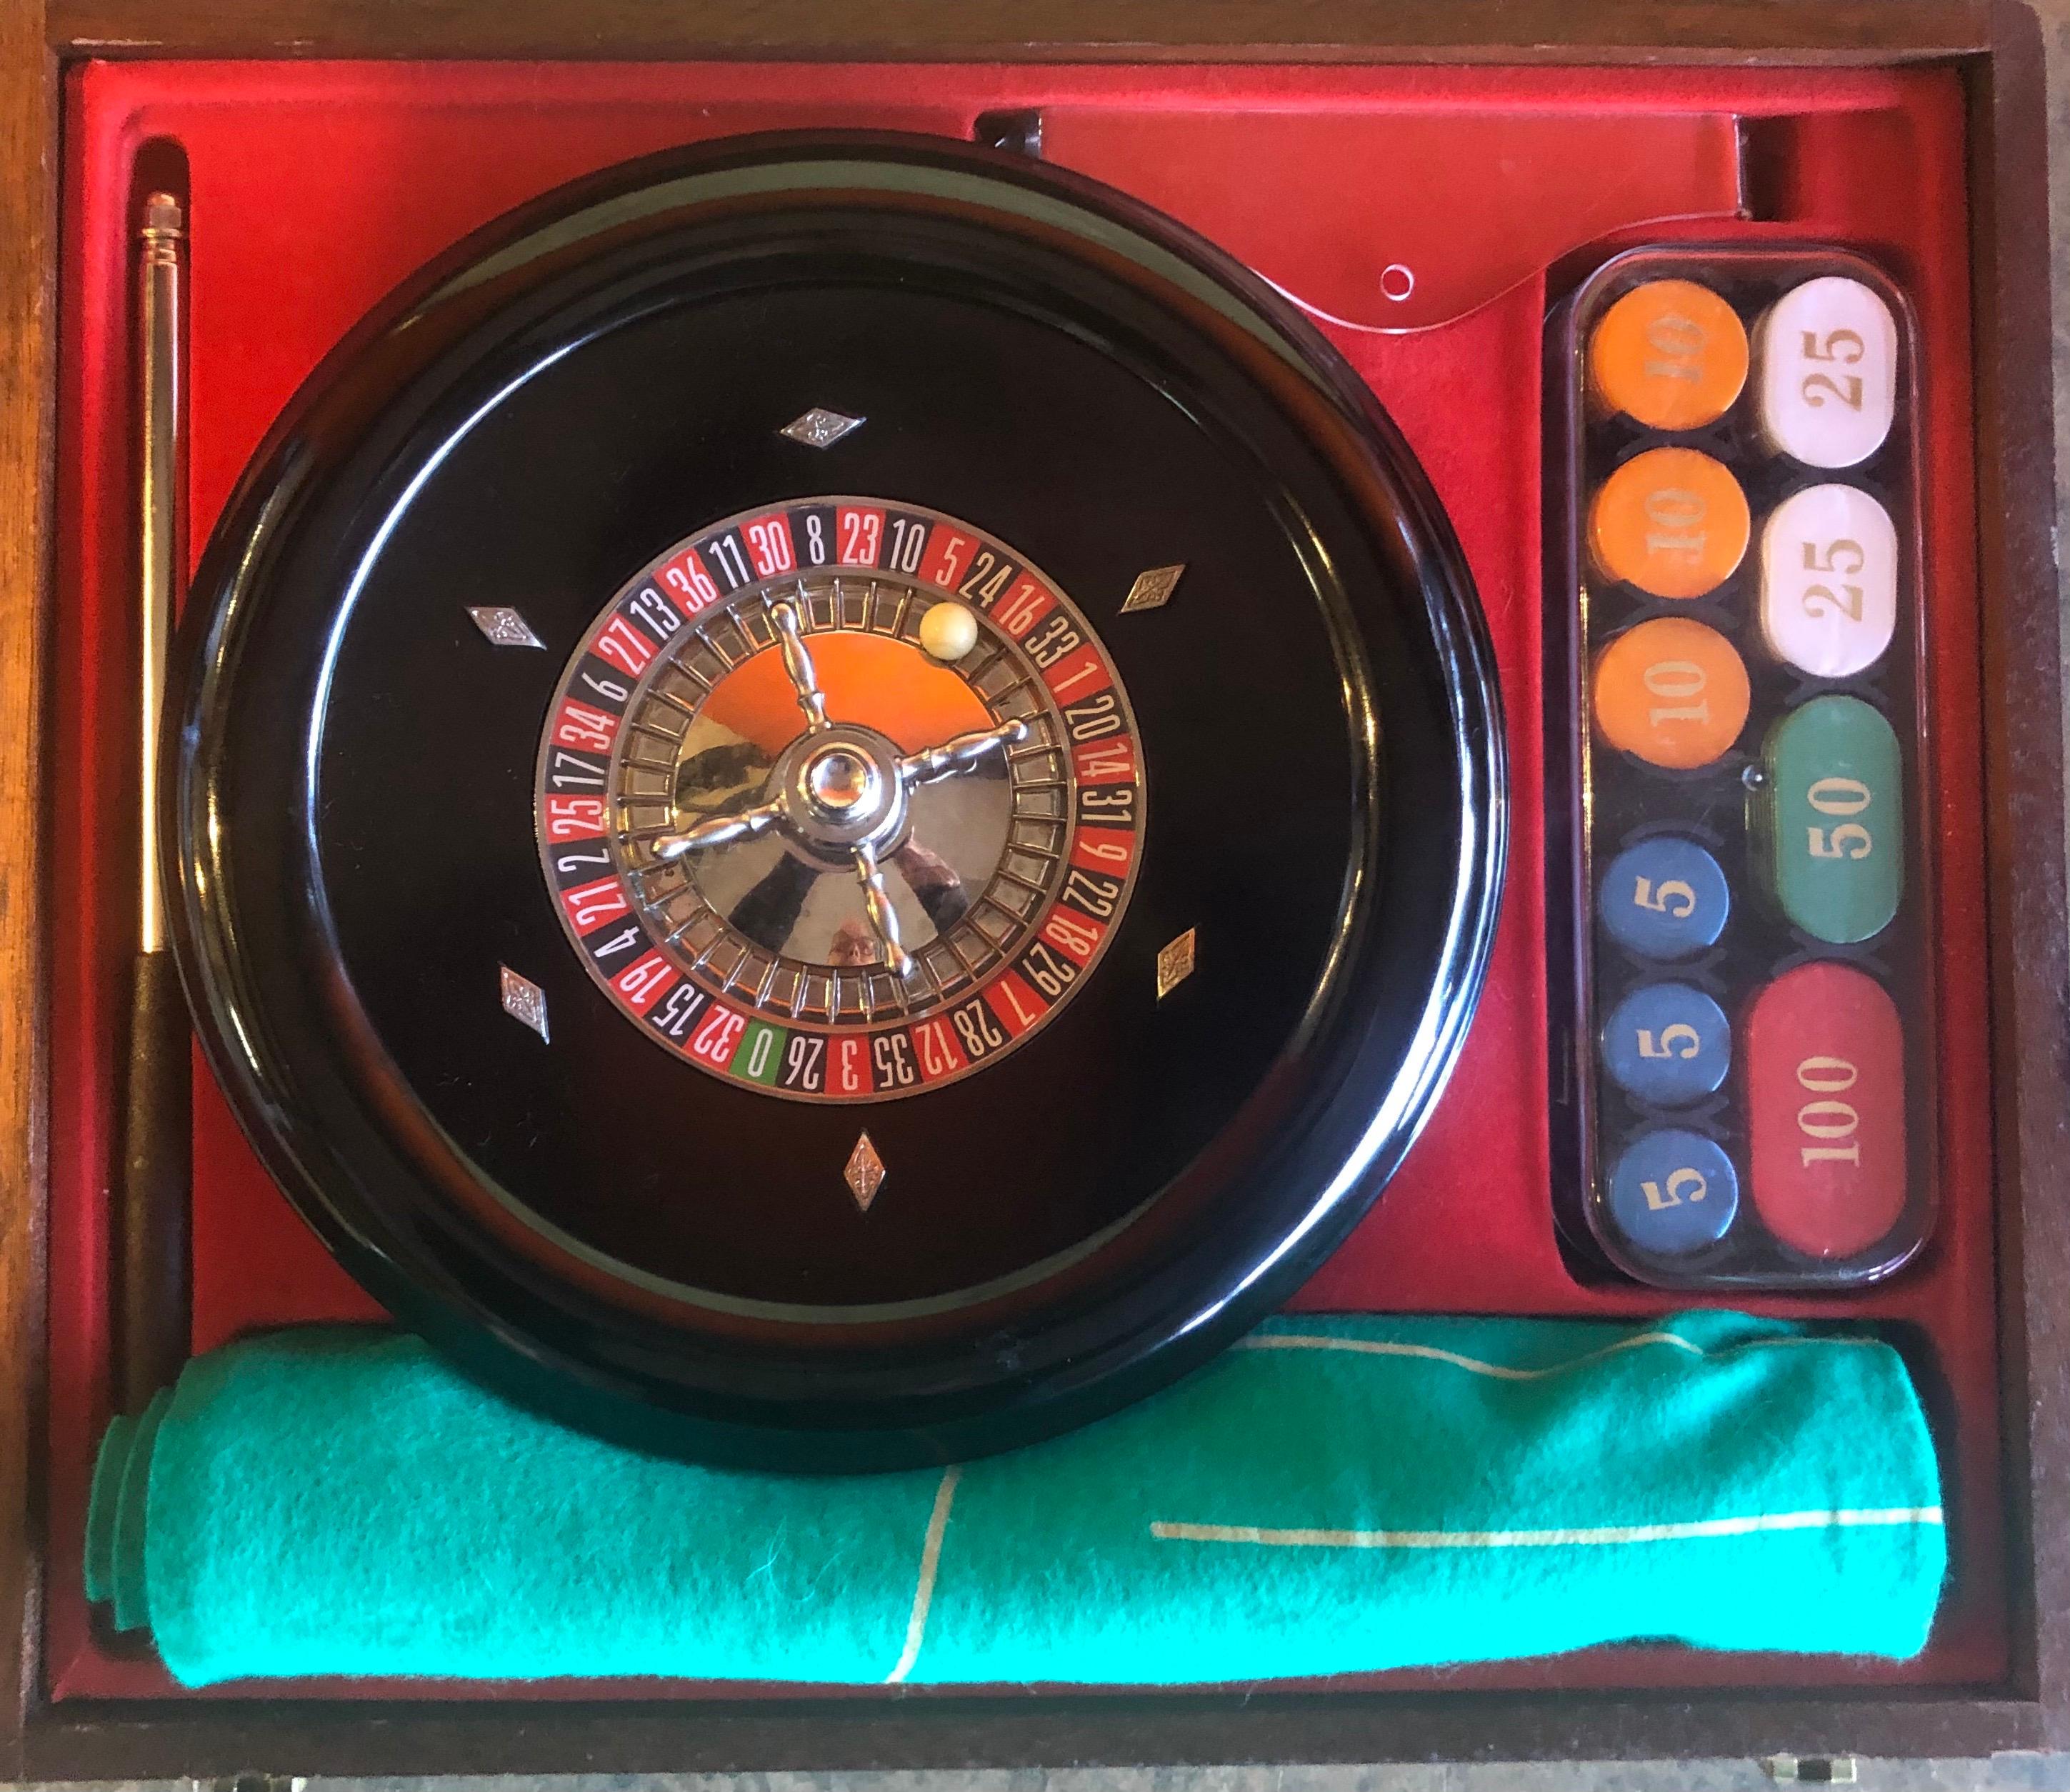 Vintage bakelite roulette wheel and accessories in case by Rottgames, circa 1940s. The wheel is 10.5